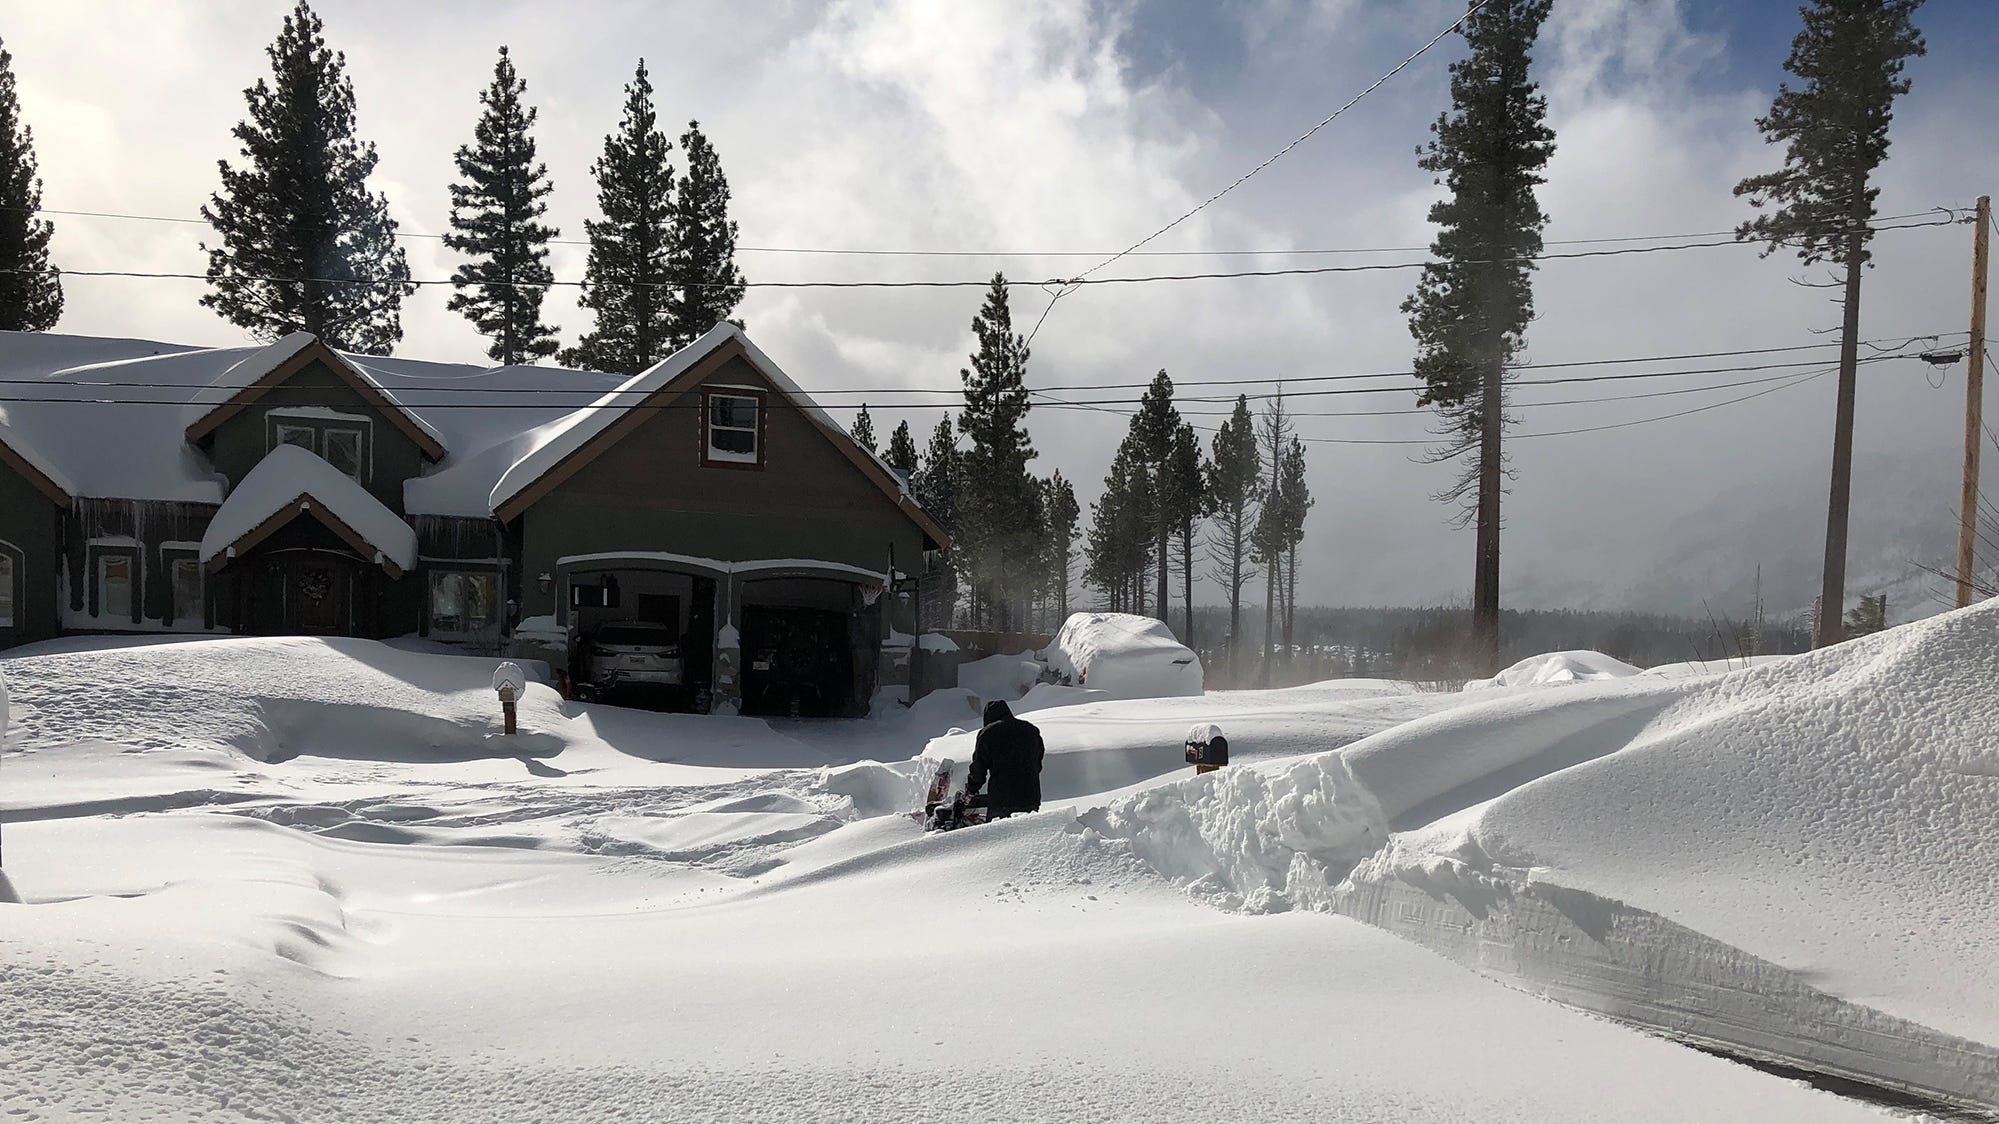 Deja vu Up to 2 feet of snow in Tahoe, 4 feet at Donner this weekend